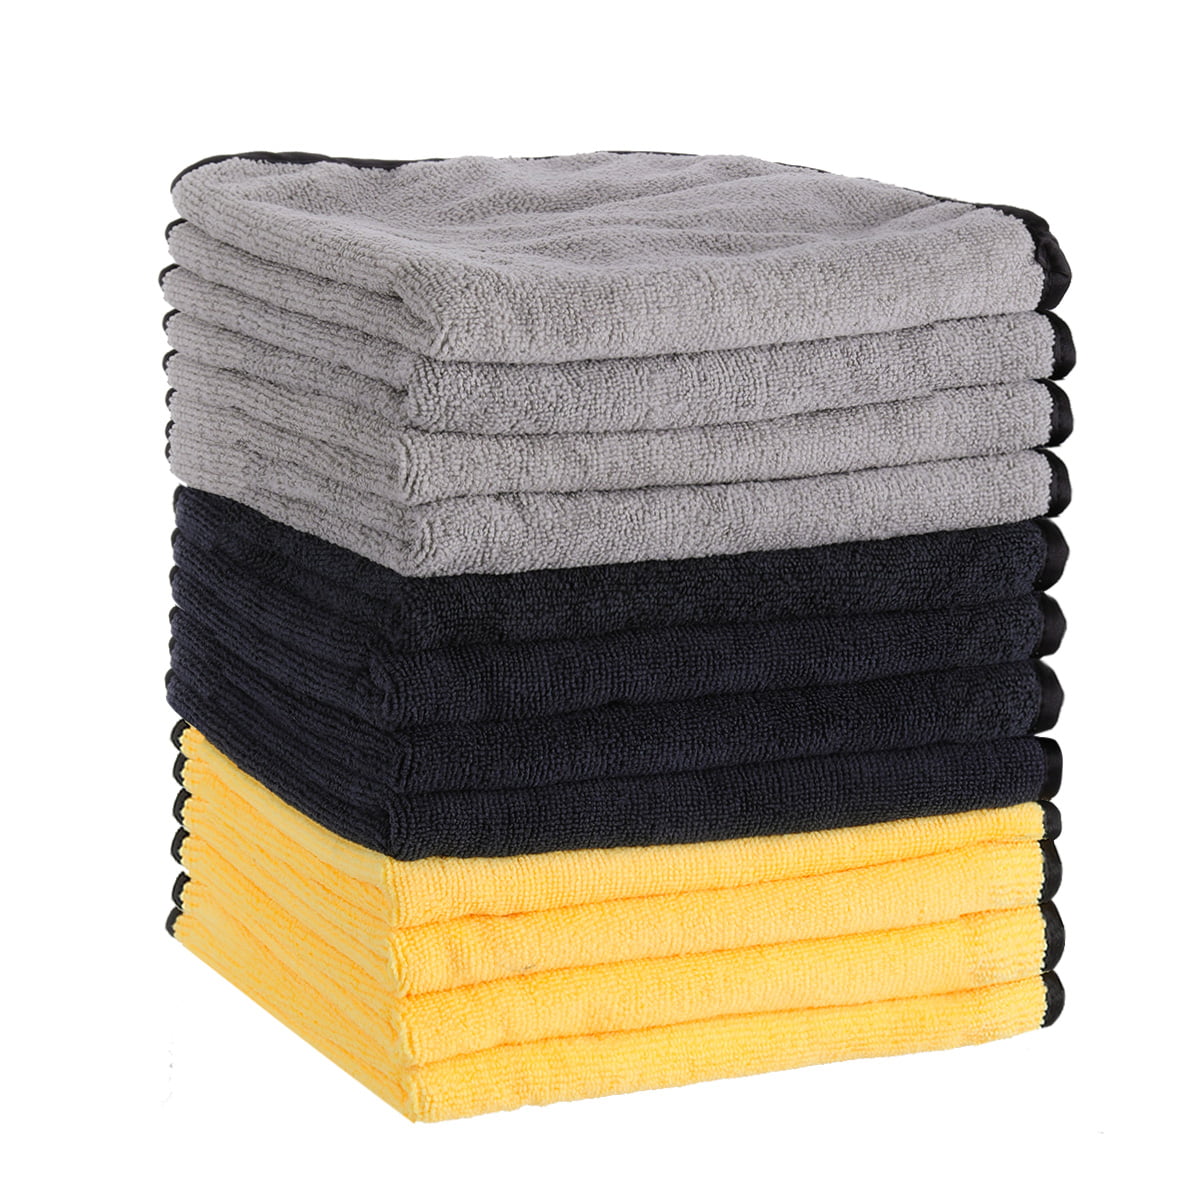 Details about   Microfiber Towels Microfiber Cleaning Cloth For Cars Kitchen Hands Rags Bulk 